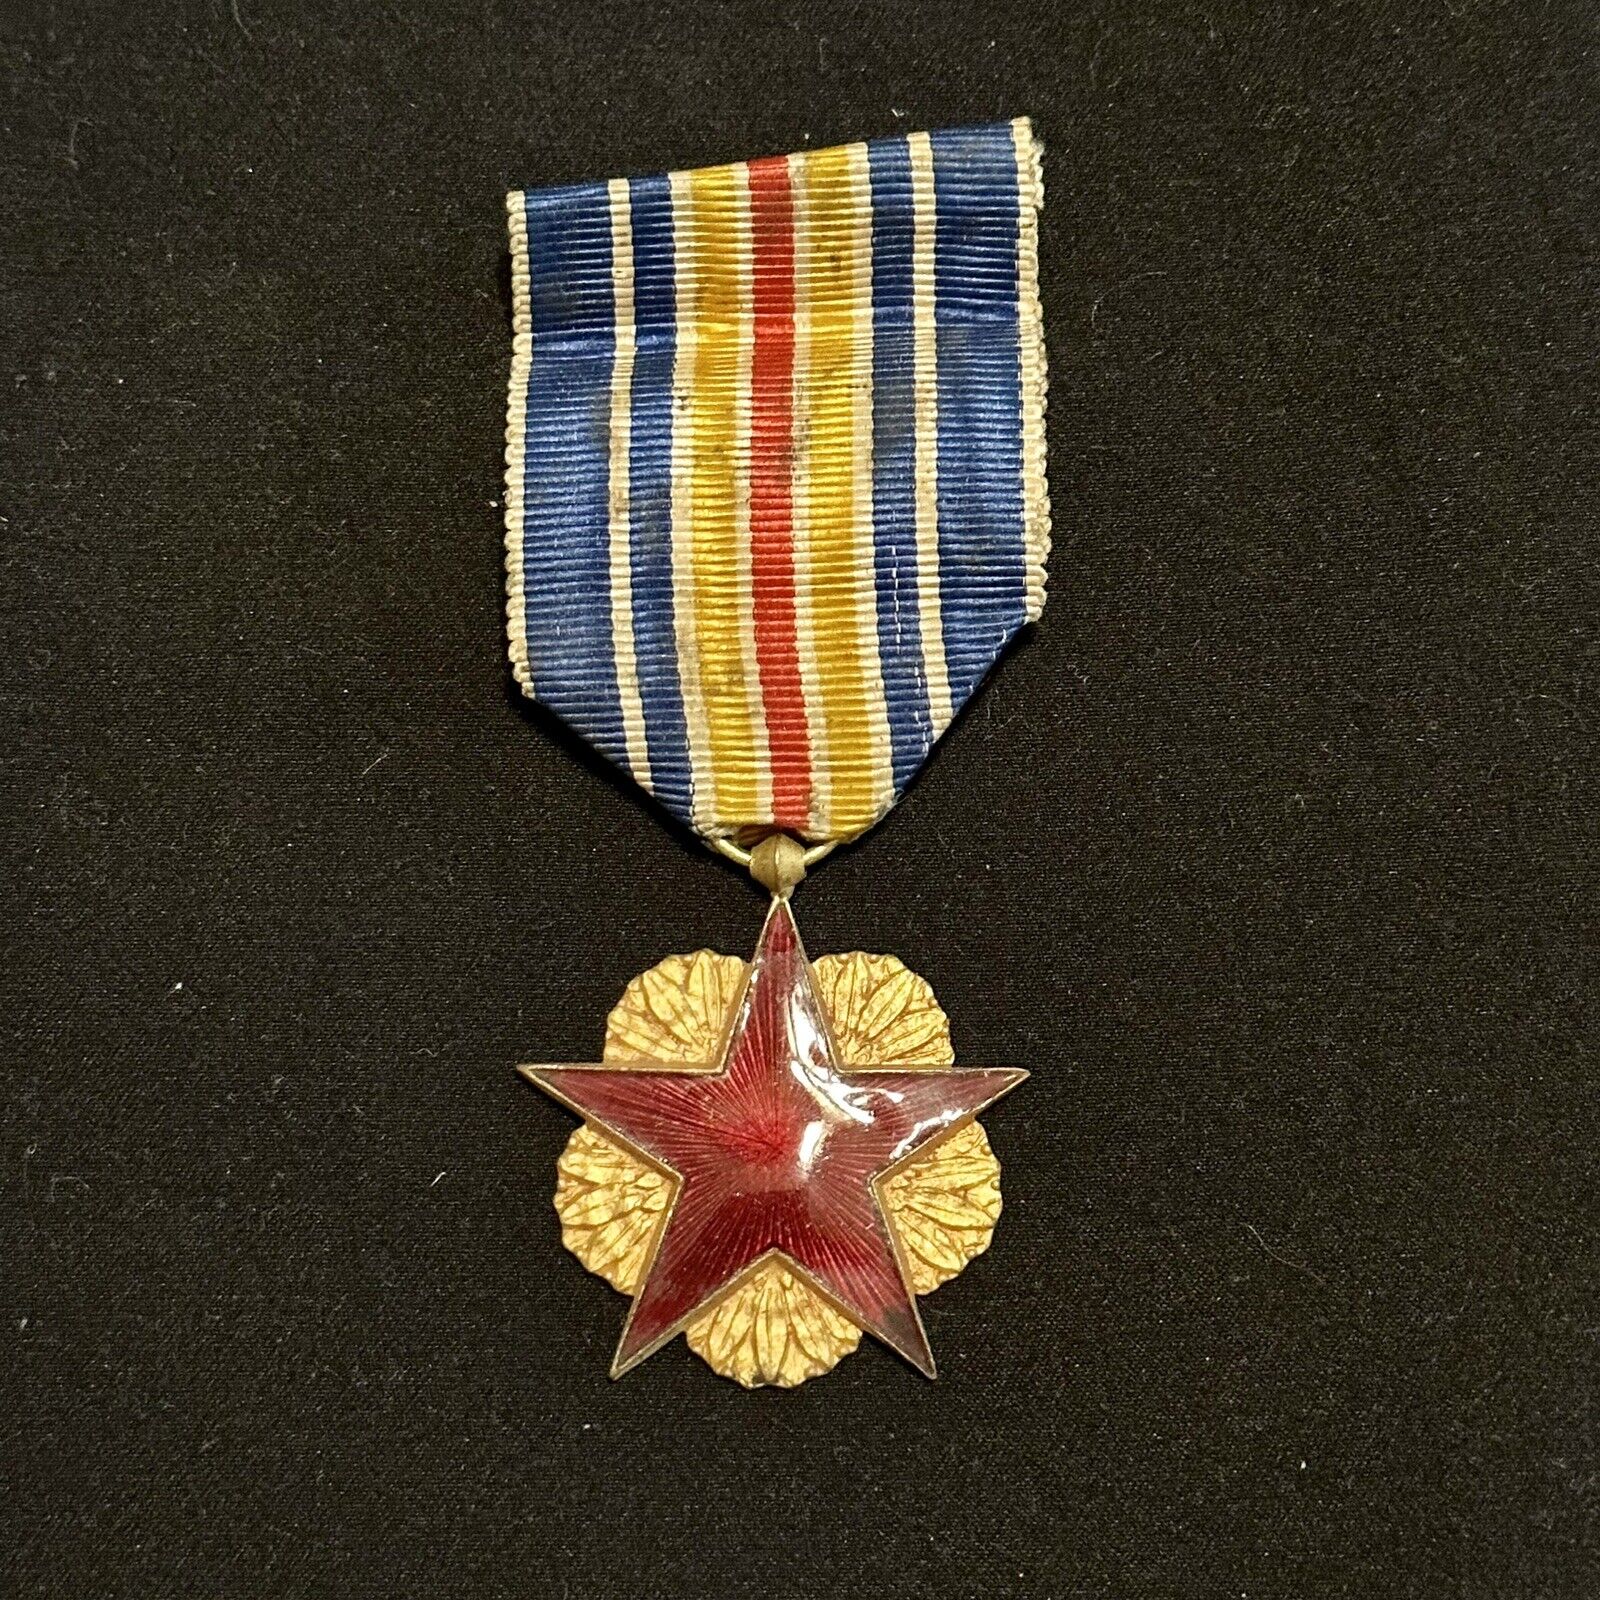 WW1 Original French Wounded Red Star Medal